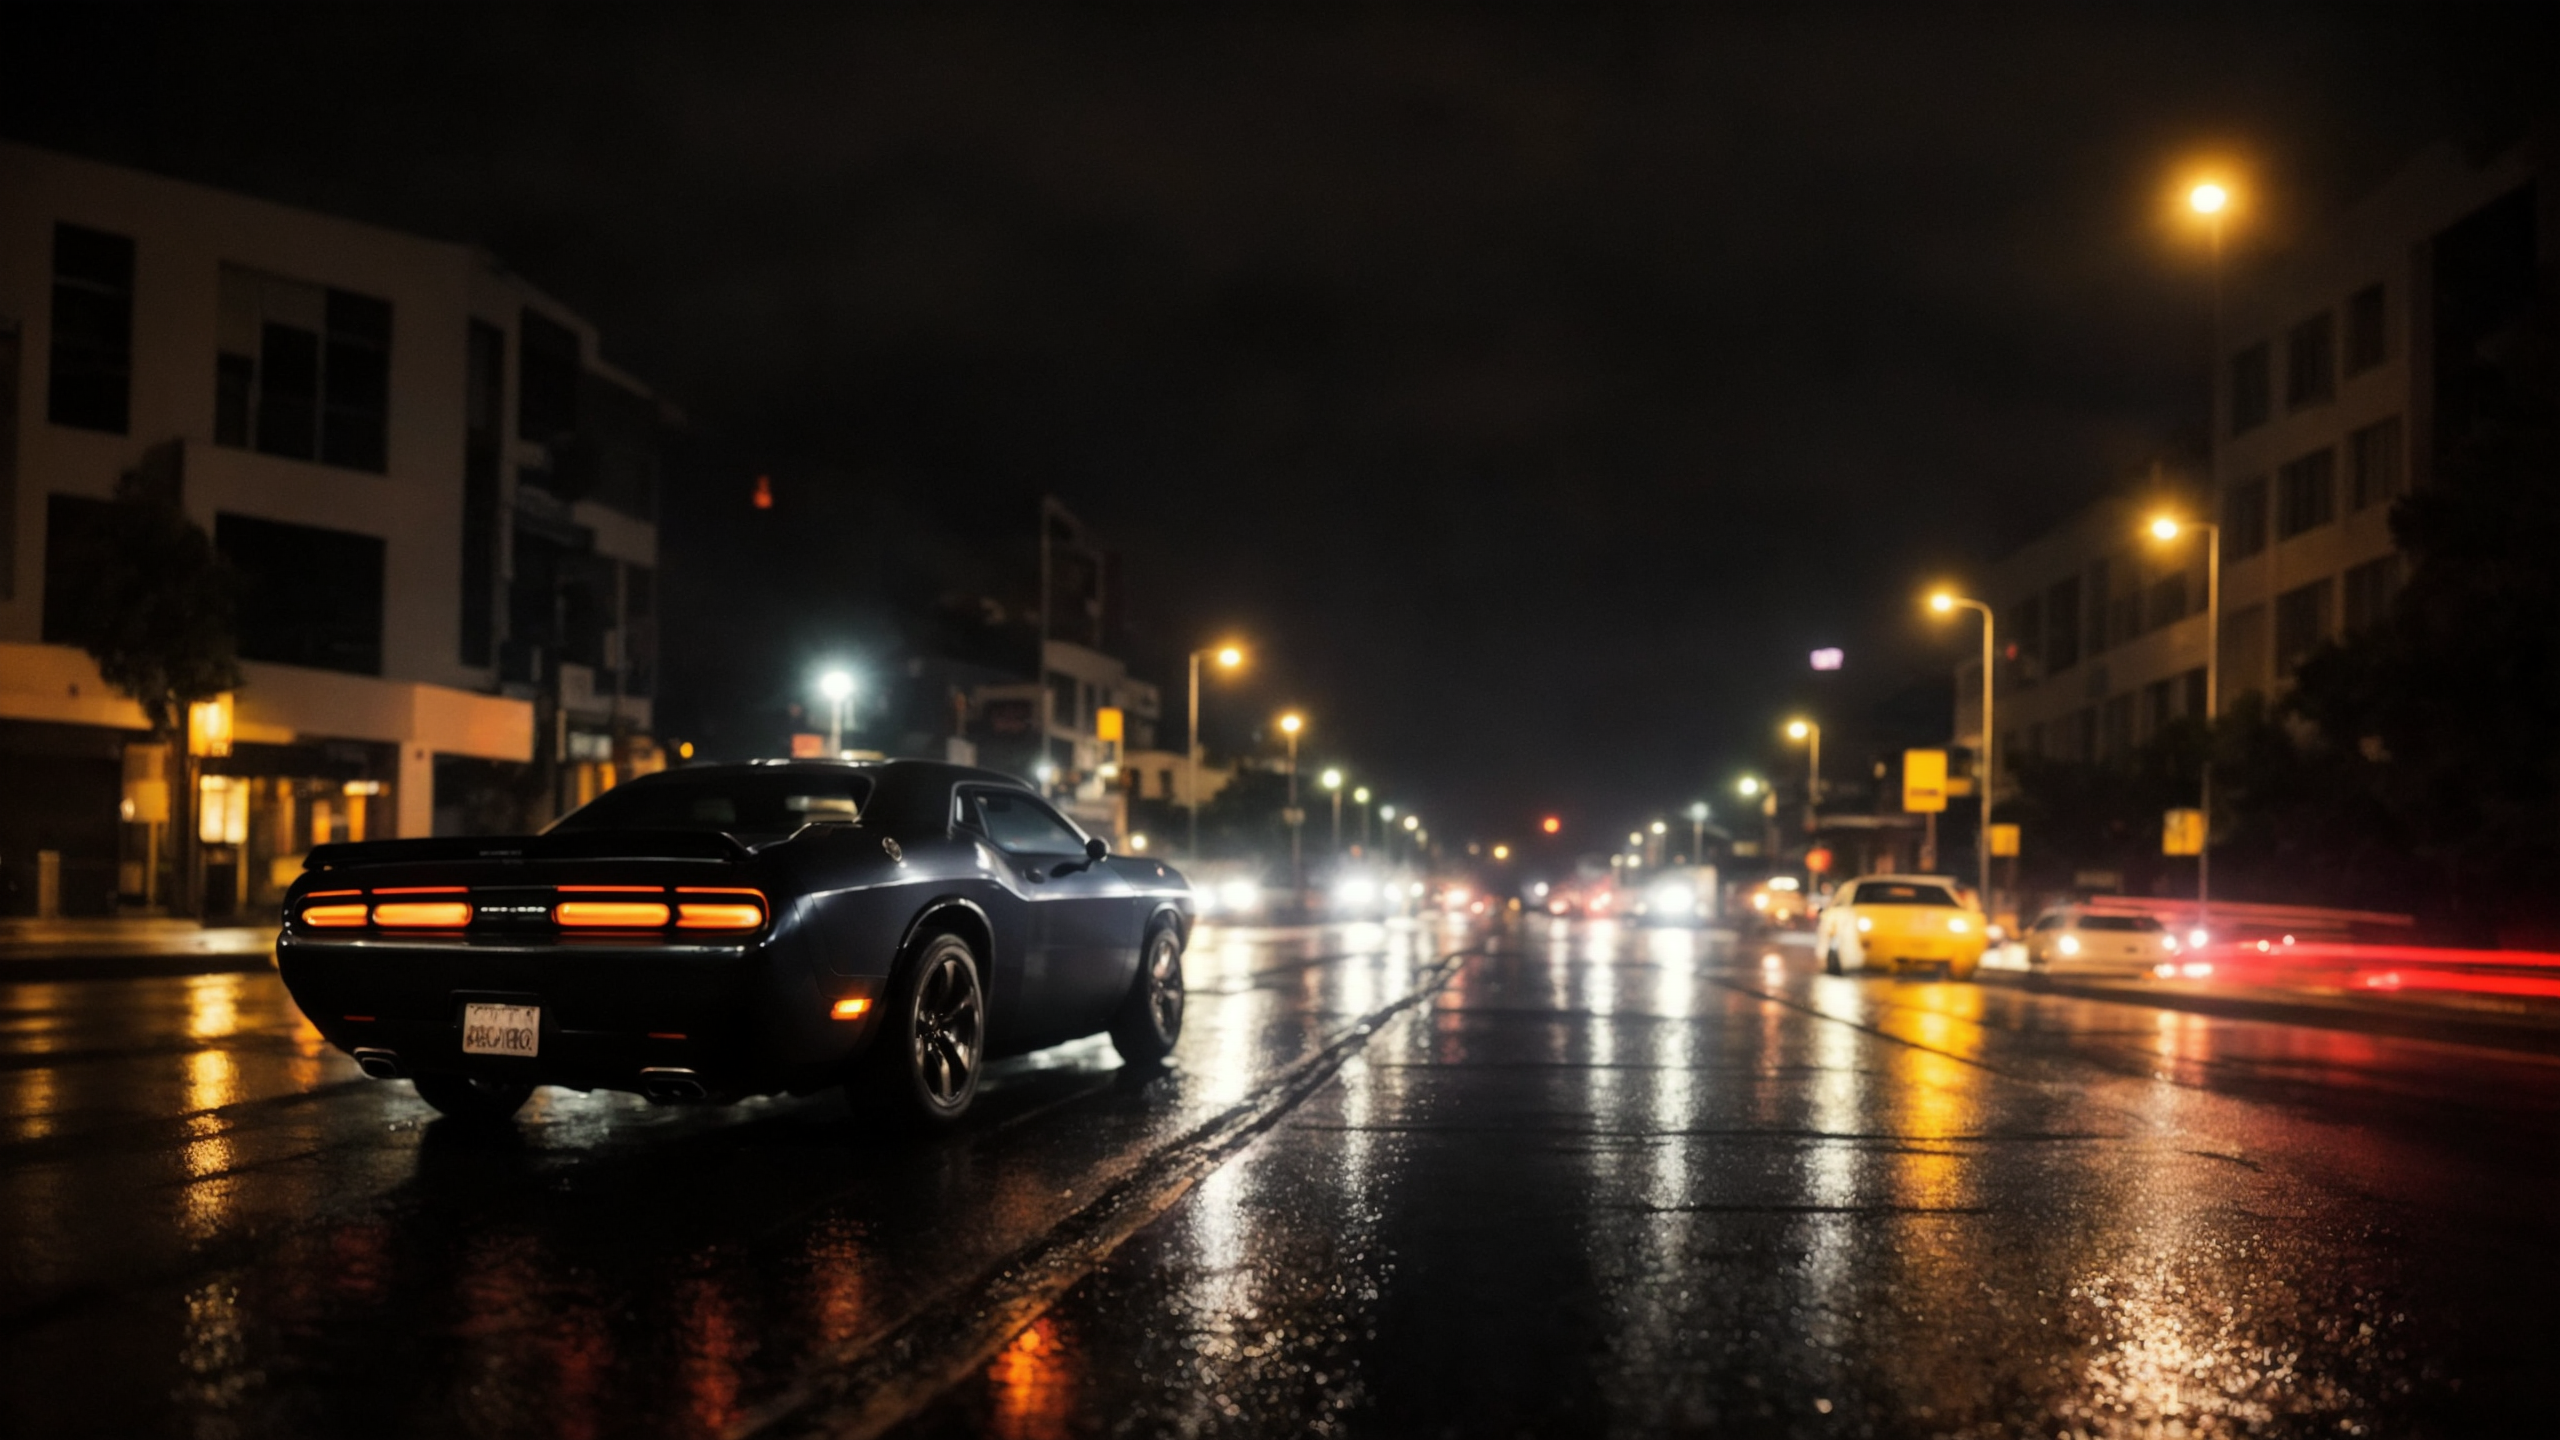 muscle car one dodge challenger driving through a city, night lights, dark movie, moody tones, cinematic, rain, reflection...